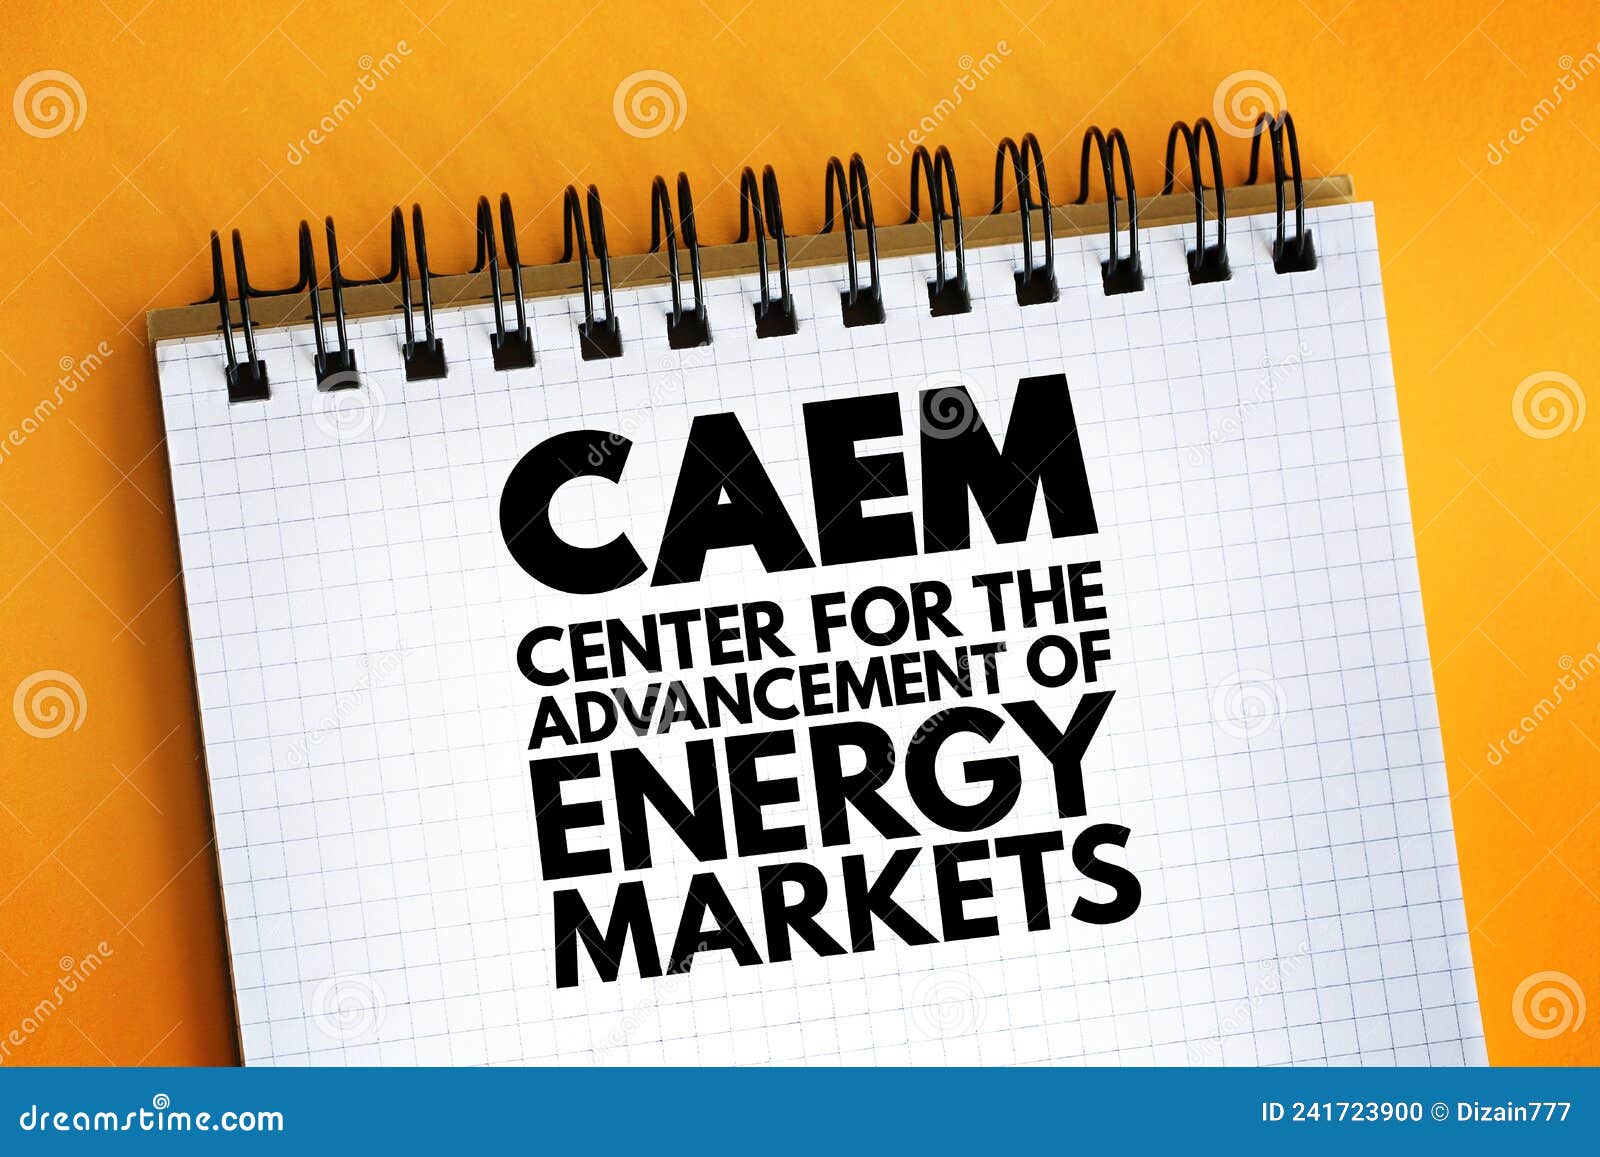 caem - center for the advancement of energy markets acronym, abbreviation concept on notepad